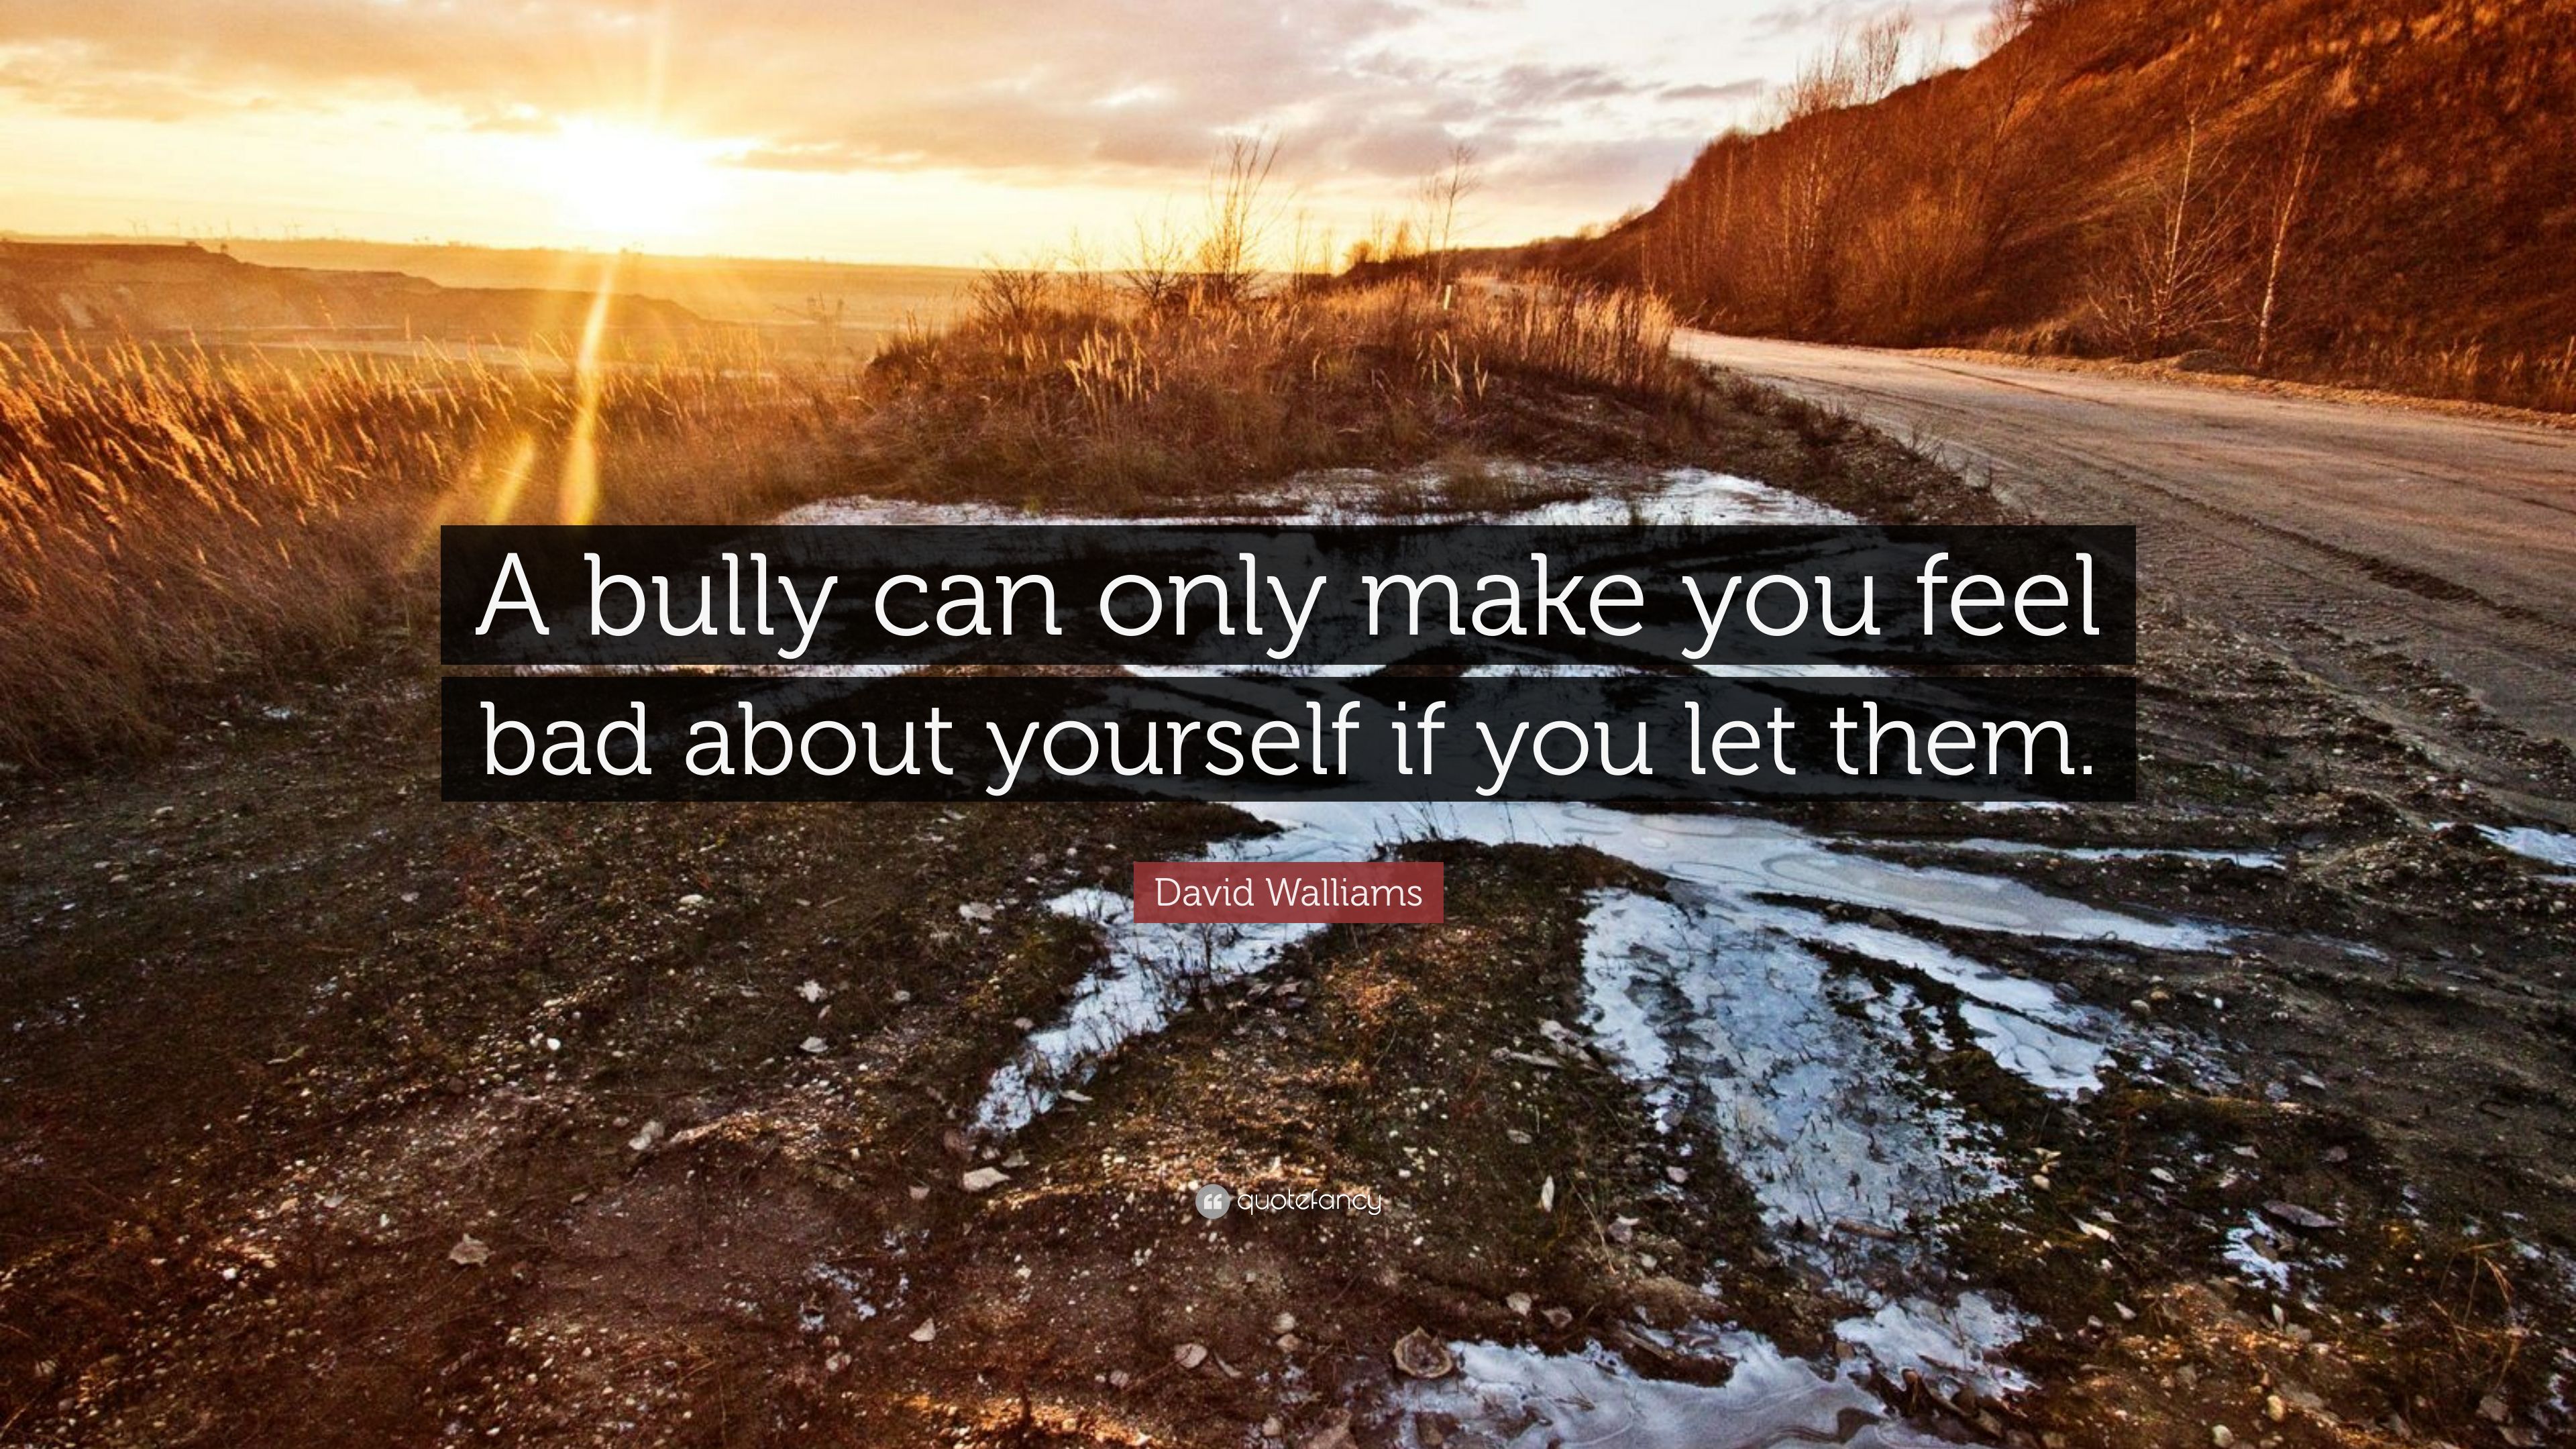 David Walliams Quote: “A bully can only make you feel bad about